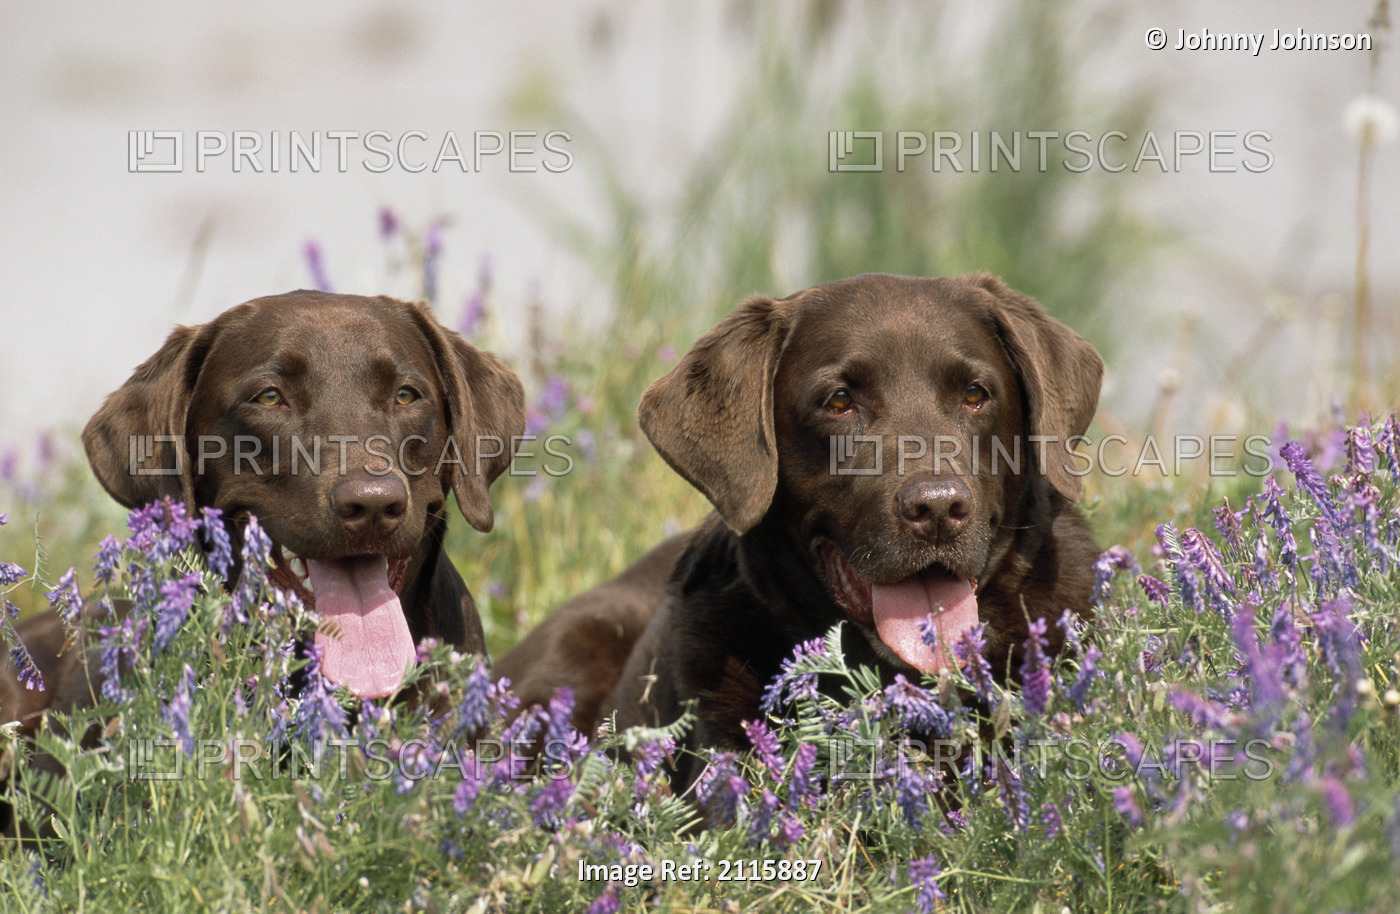 Chocolate Labrador Retriever Dogs Laying In A Field Of Hairy Vetch Flowers In ...